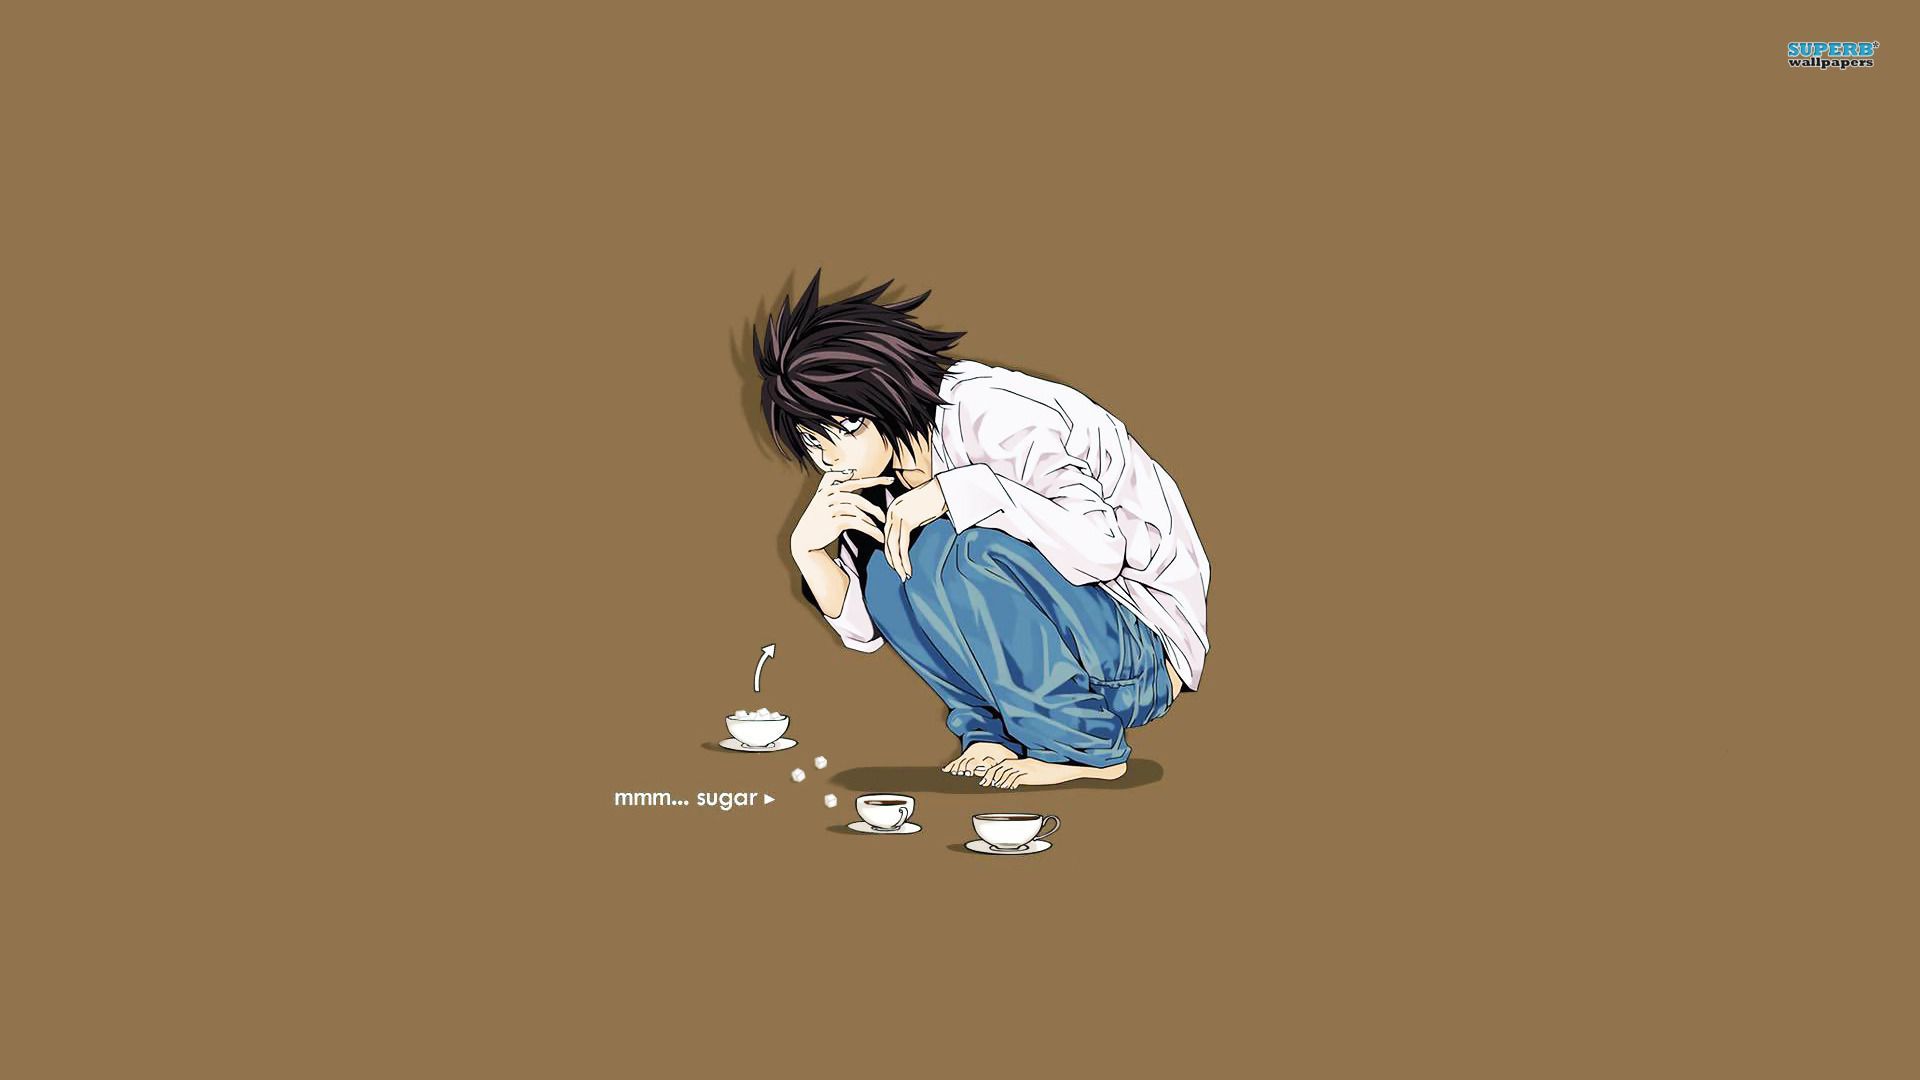 L - Death Note wallpaper - Anime wallpapers - #13680